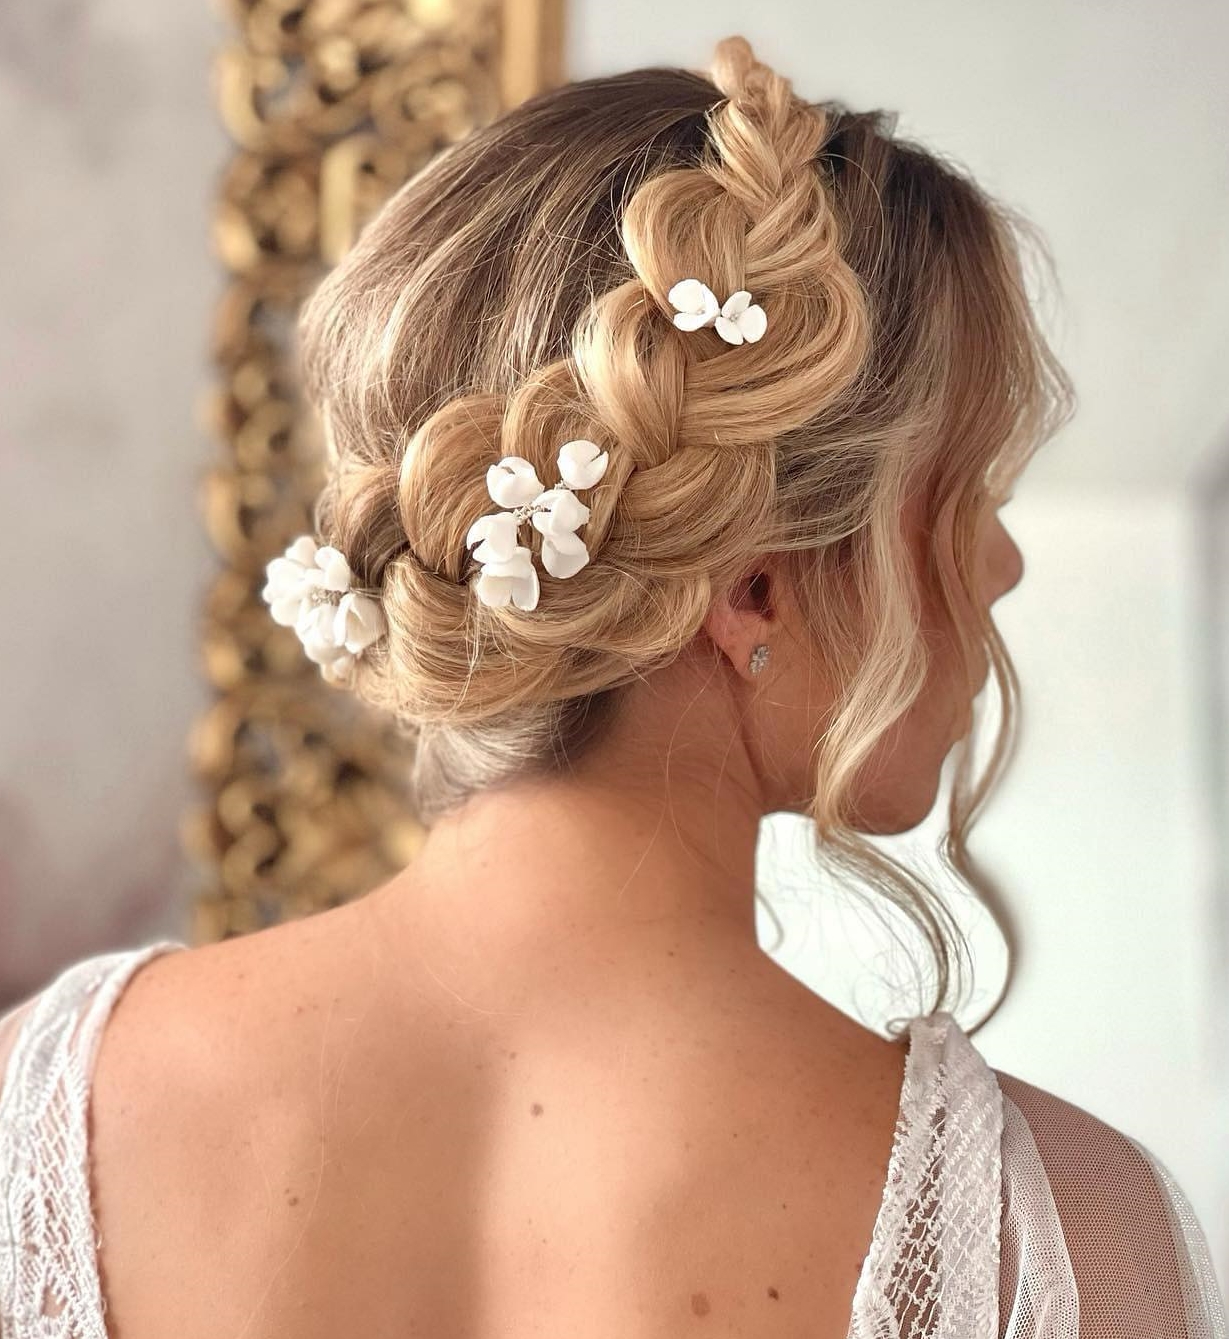 50 Romantic Wedding Hairstyles To Bring The Brides Image To Perfection Hairstylery 1533